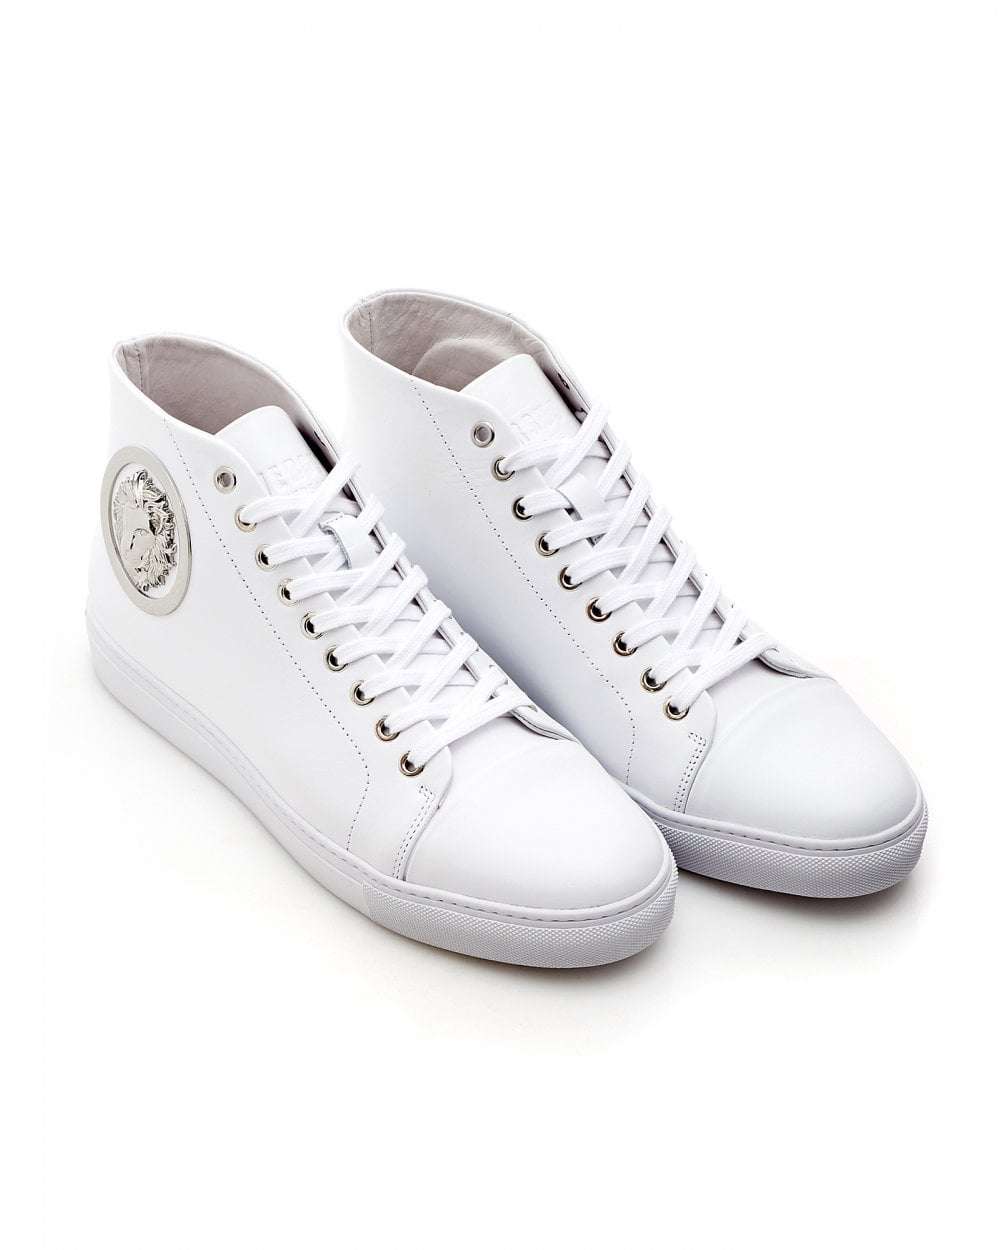 Versus Versace Mens Silver Lion Trainers, High Top White ...